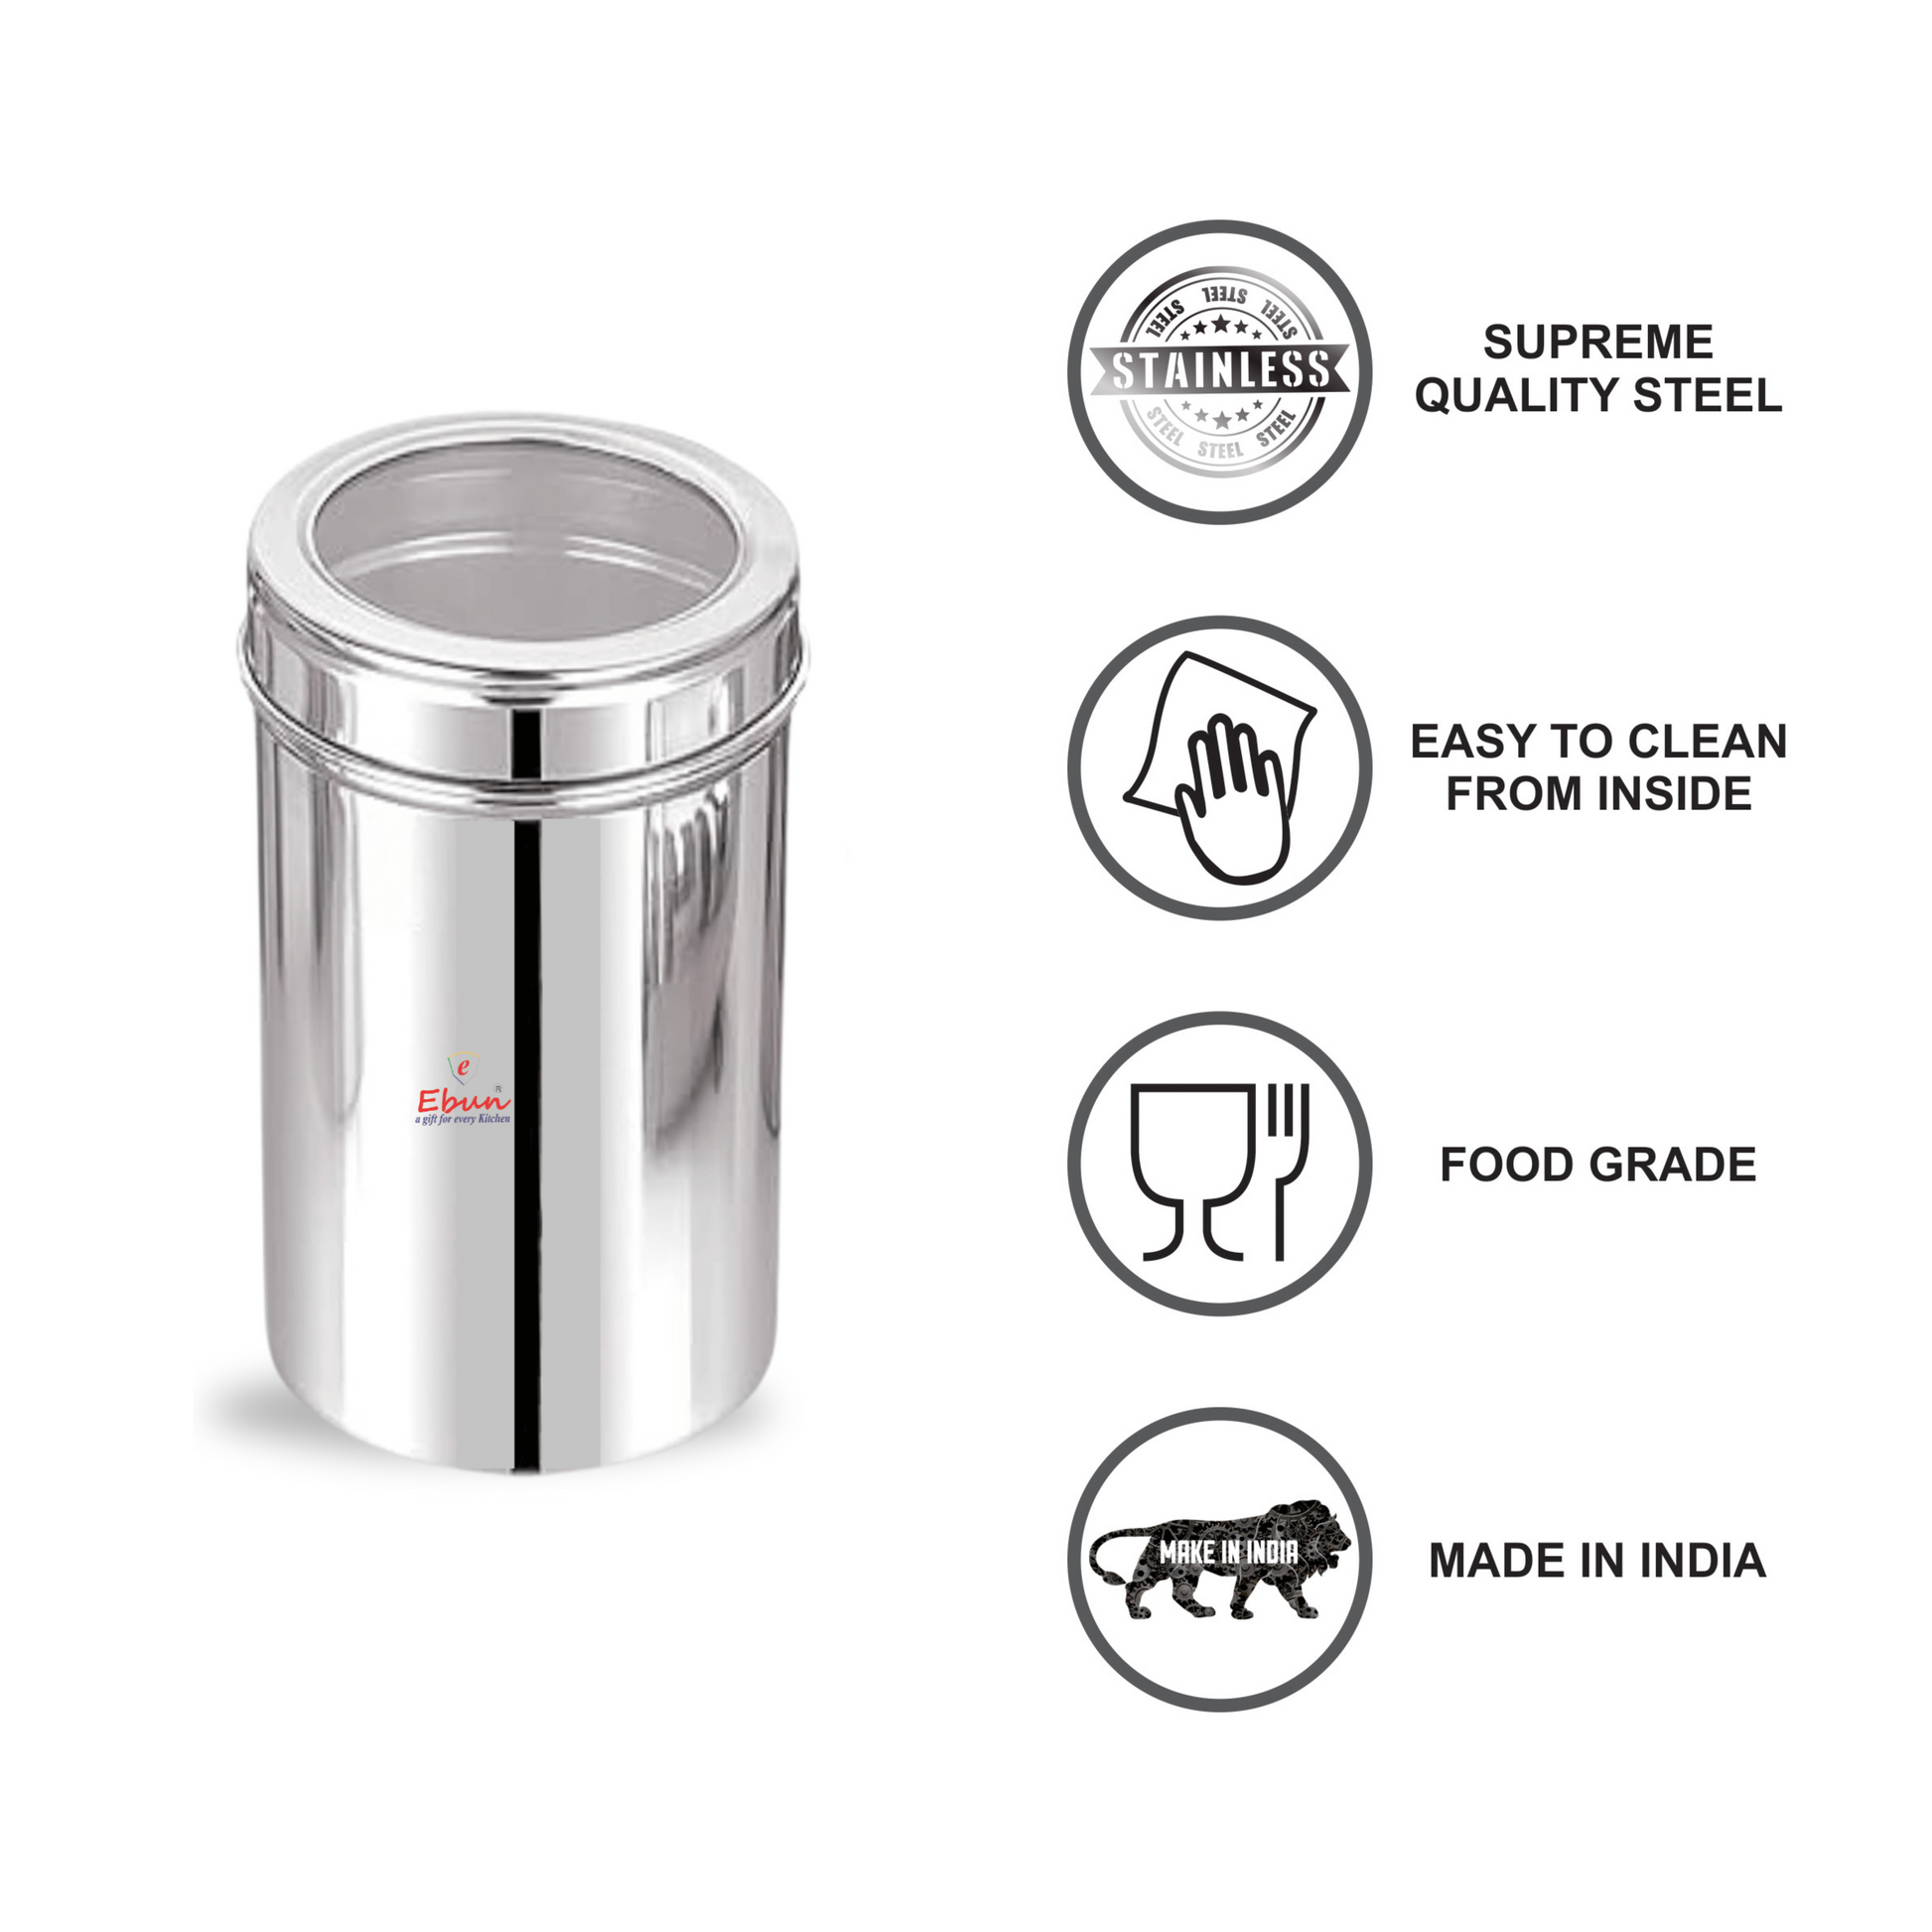 steel containers for kitchen 2kg | steel storage containers for fridge | square steel container | stainless steel airtight container | steel container set | steel containers with lid | kitchen storage containers set steel | airtight steel containers | container for kitchen storage set steel